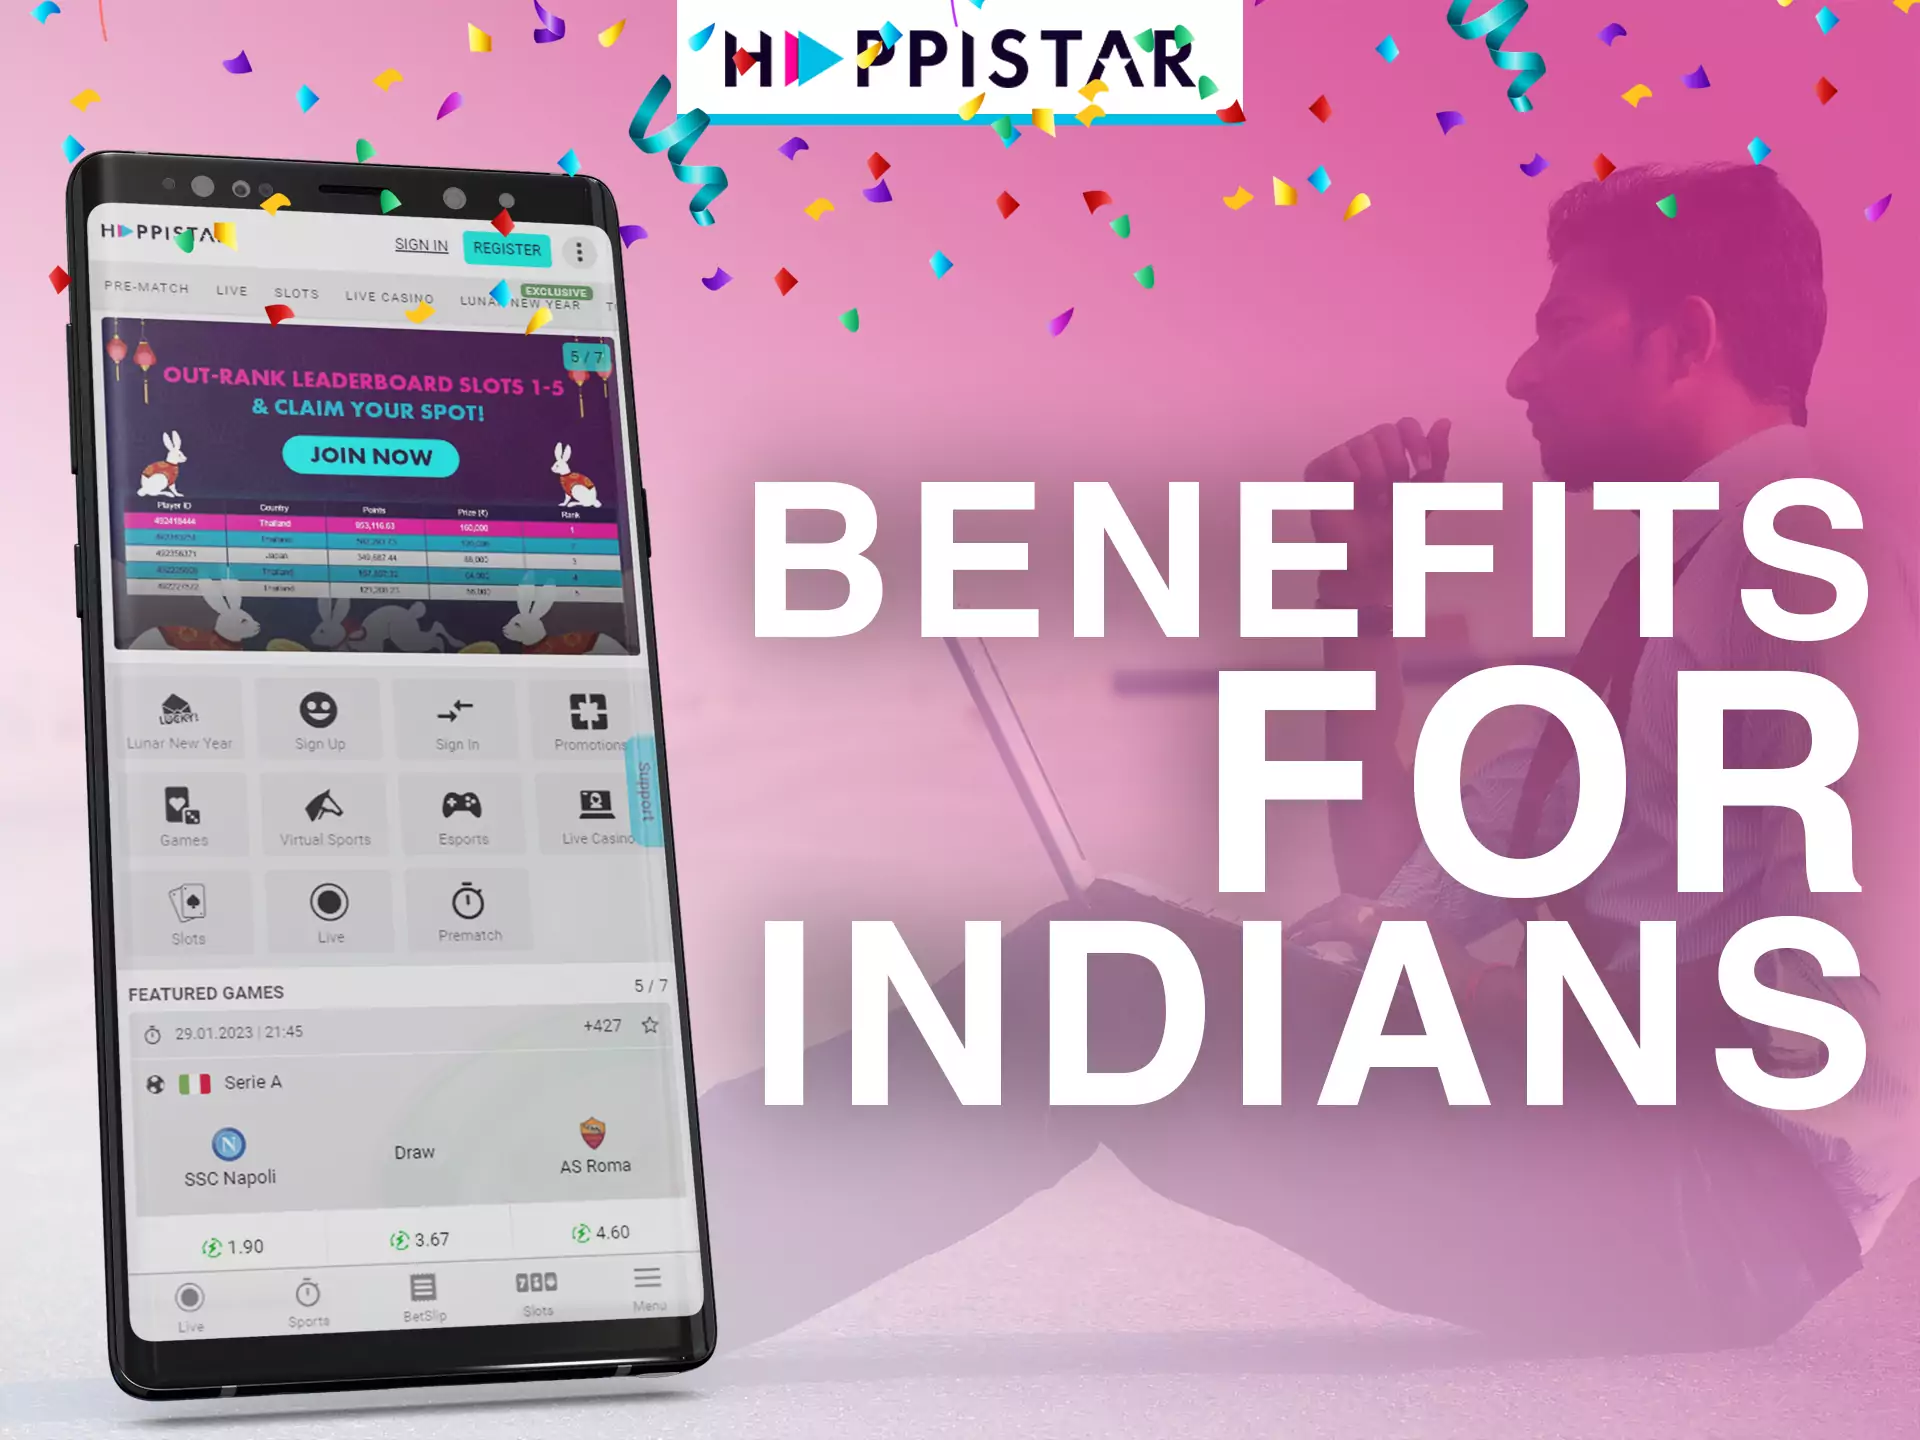 Happistar is an India-oriented bookmaker.